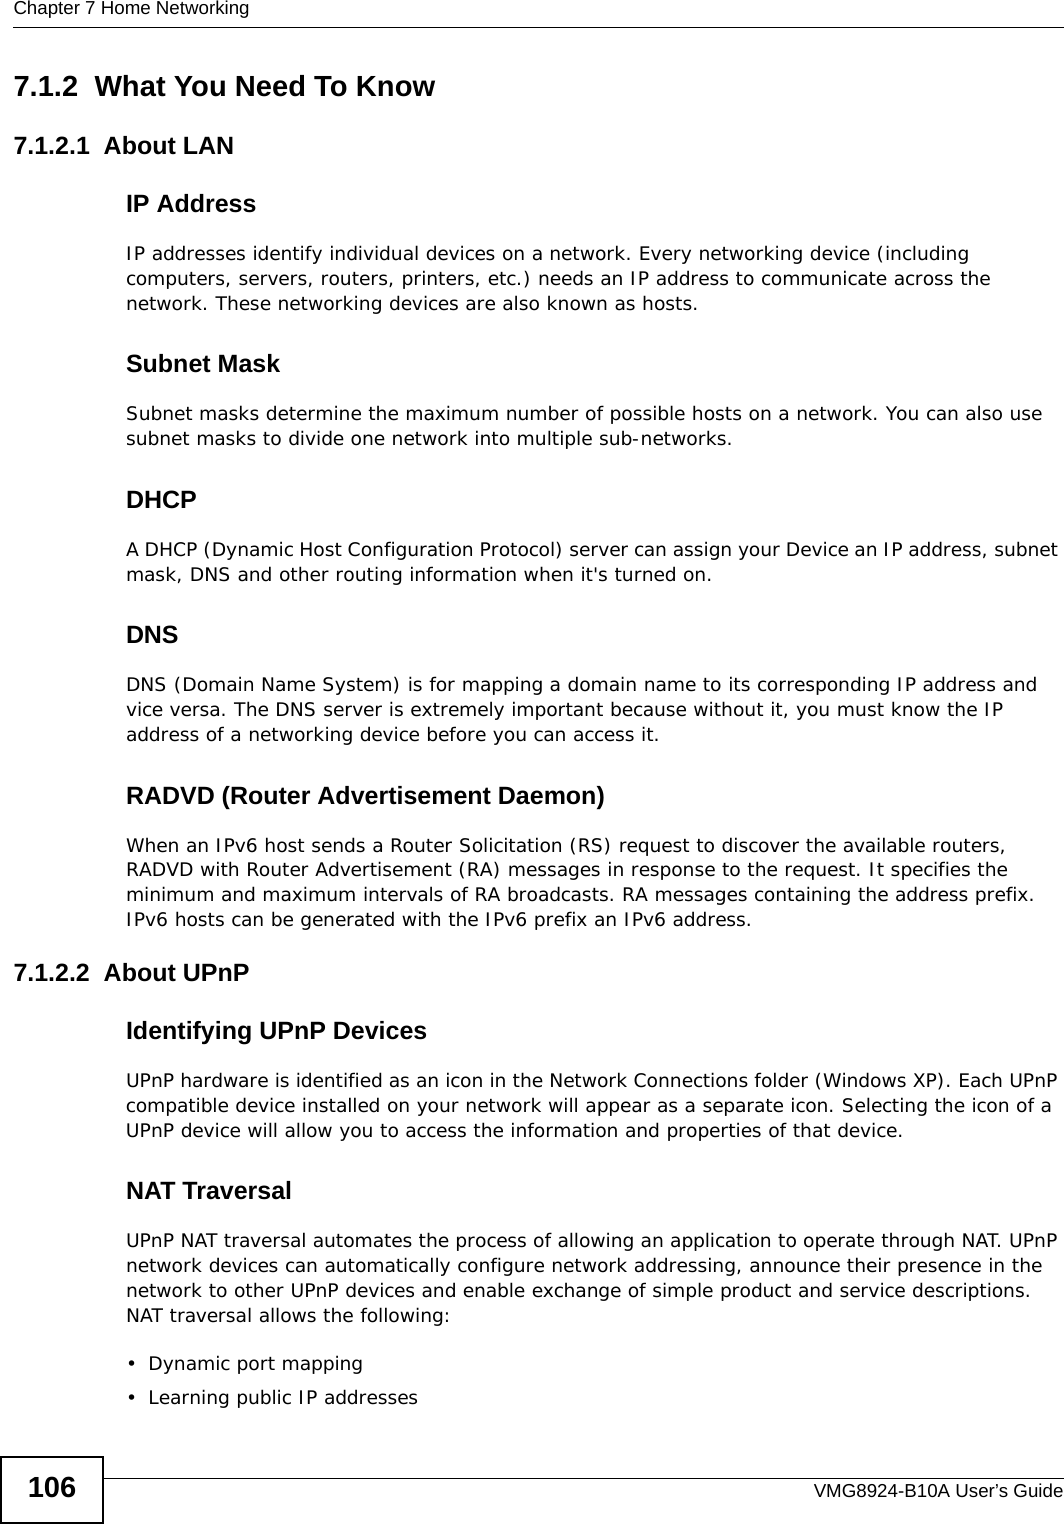 Chapter 7 Home NetworkingVMG8924-B10A User’s Guide1067.1.2  What You Need To Know7.1.2.1  About LANIP AddressIP addresses identify individual devices on a network. Every networking device (including computers, servers, routers, printers, etc.) needs an IP address to communicate across the network. These networking devices are also known as hosts.Subnet MaskSubnet masks determine the maximum number of possible hosts on a network. You can also use subnet masks to divide one network into multiple sub-networks.DHCPA DHCP (Dynamic Host Configuration Protocol) server can assign your Device an IP address, subnet mask, DNS and other routing information when it&apos;s turned on.DNSDNS (Domain Name System) is for mapping a domain name to its corresponding IP address and vice versa. The DNS server is extremely important because without it, you must know the IP address of a networking device before you can access it.RADVD (Router Advertisement Daemon)When an IPv6 host sends a Router Solicitation (RS) request to discover the available routers, RADVD with Router Advertisement (RA) messages in response to the request. It specifies the minimum and maximum intervals of RA broadcasts. RA messages containing the address prefix. IPv6 hosts can be generated with the IPv6 prefix an IPv6 address.7.1.2.2  About UPnPIdentifying UPnP DevicesUPnP hardware is identified as an icon in the Network Connections folder (Windows XP). Each UPnP compatible device installed on your network will appear as a separate icon. Selecting the icon of a UPnP device will allow you to access the information and properties of that device. NAT TraversalUPnP NAT traversal automates the process of allowing an application to operate through NAT. UPnP network devices can automatically configure network addressing, announce their presence in the network to other UPnP devices and enable exchange of simple product and service descriptions. NAT traversal allows the following:• Dynamic port mapping• Learning public IP addresses